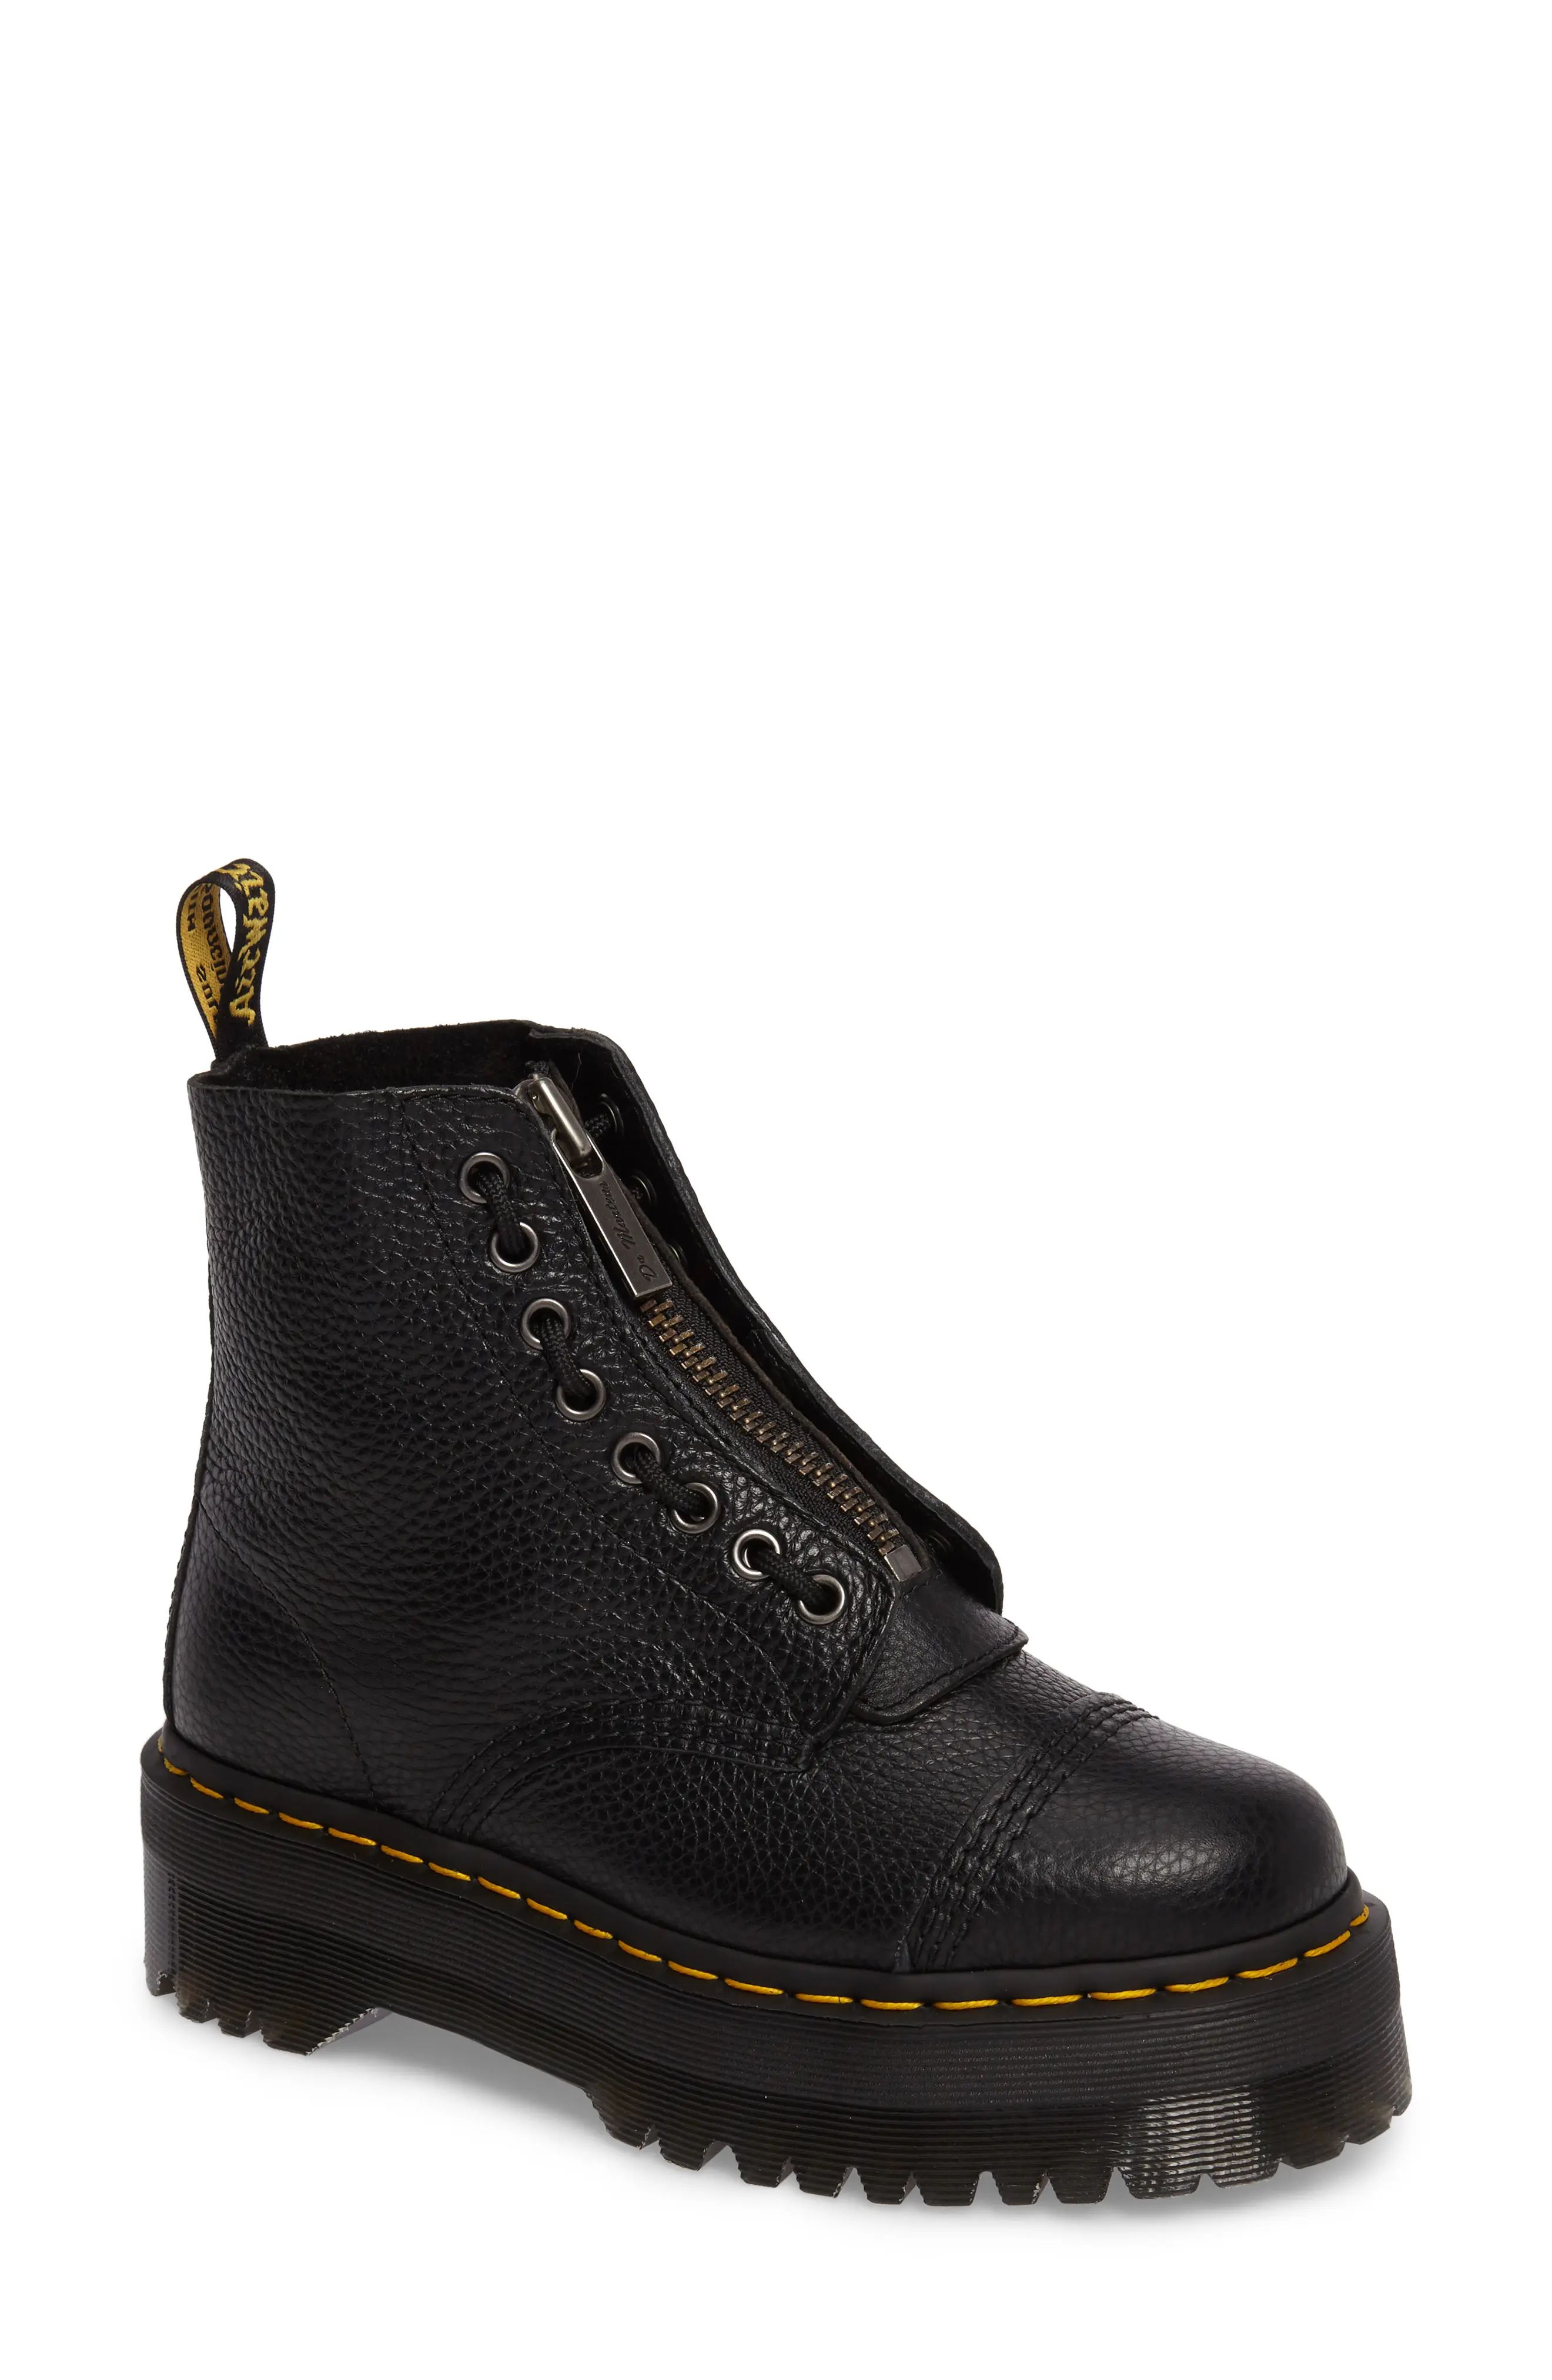 Dr. Martens Sinclair Bootie, Size 6Us in Black Leather at Nordstrom | Nordstrom